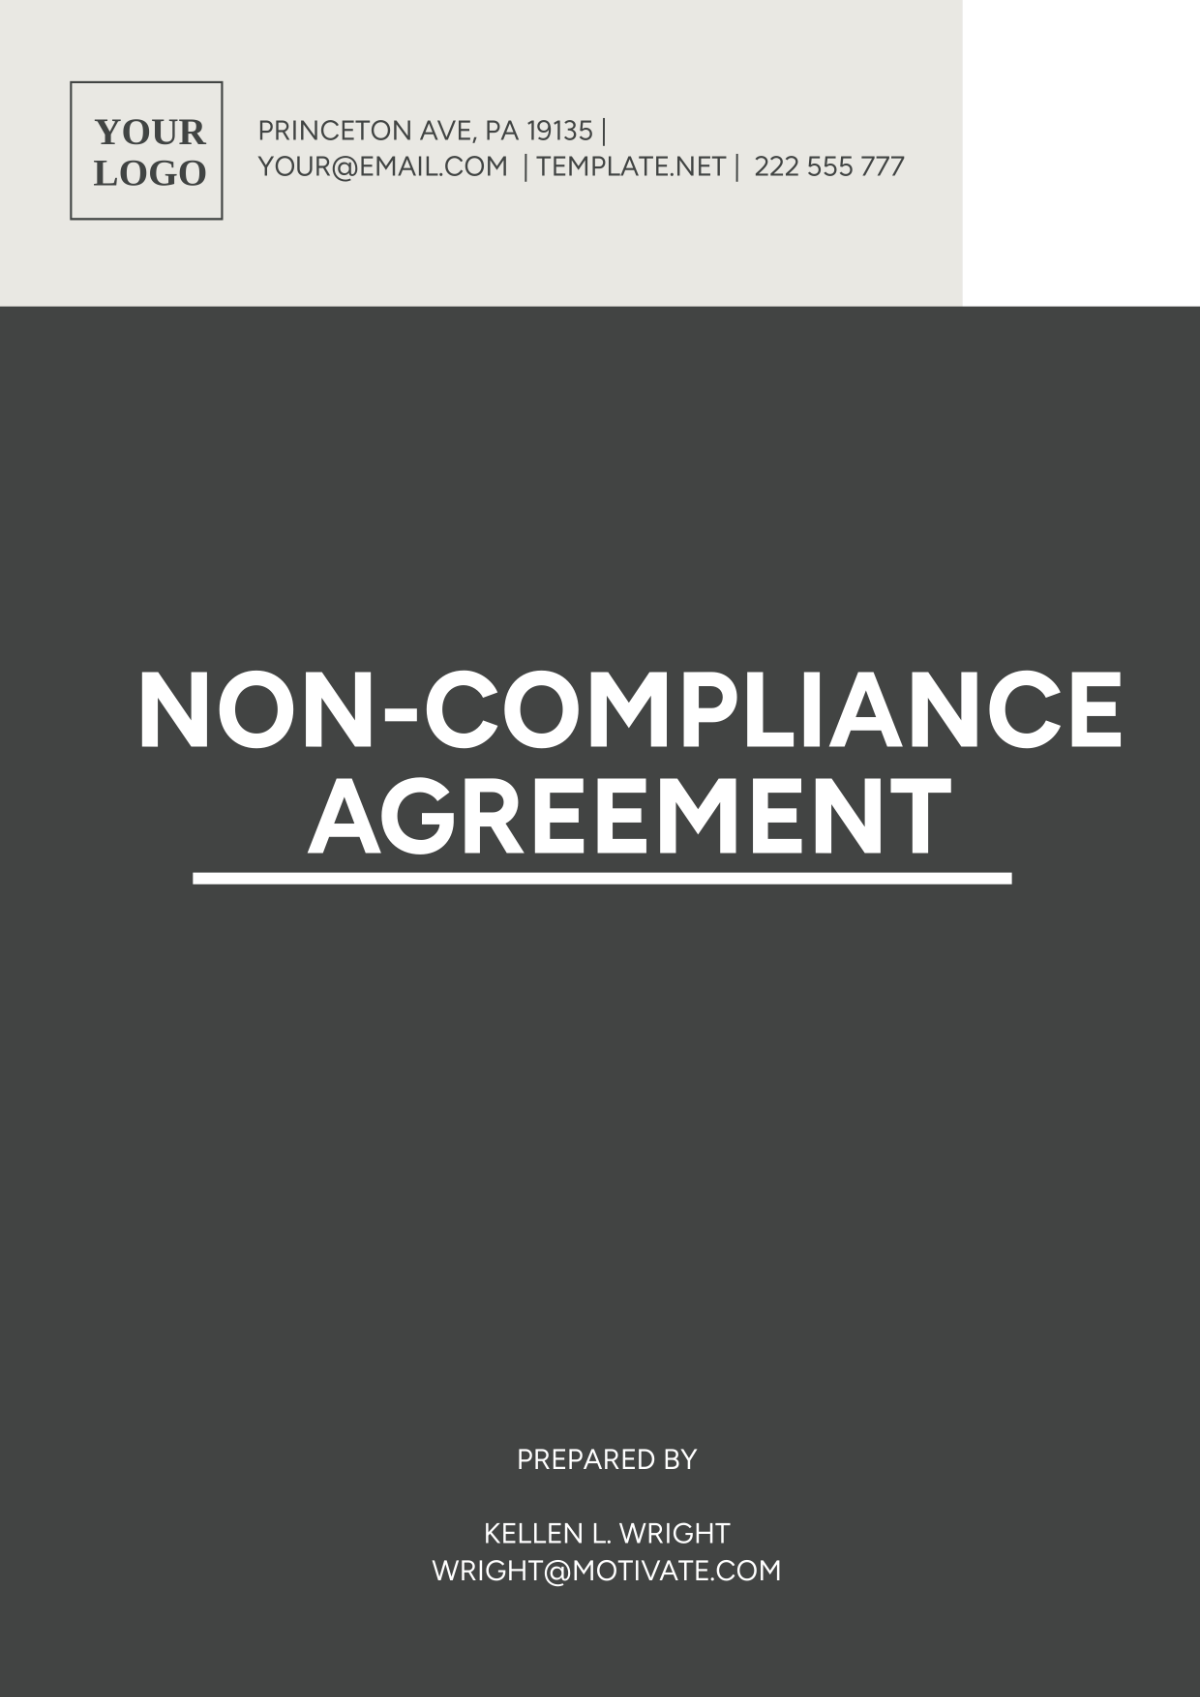 Non-Compliance Agreement Template